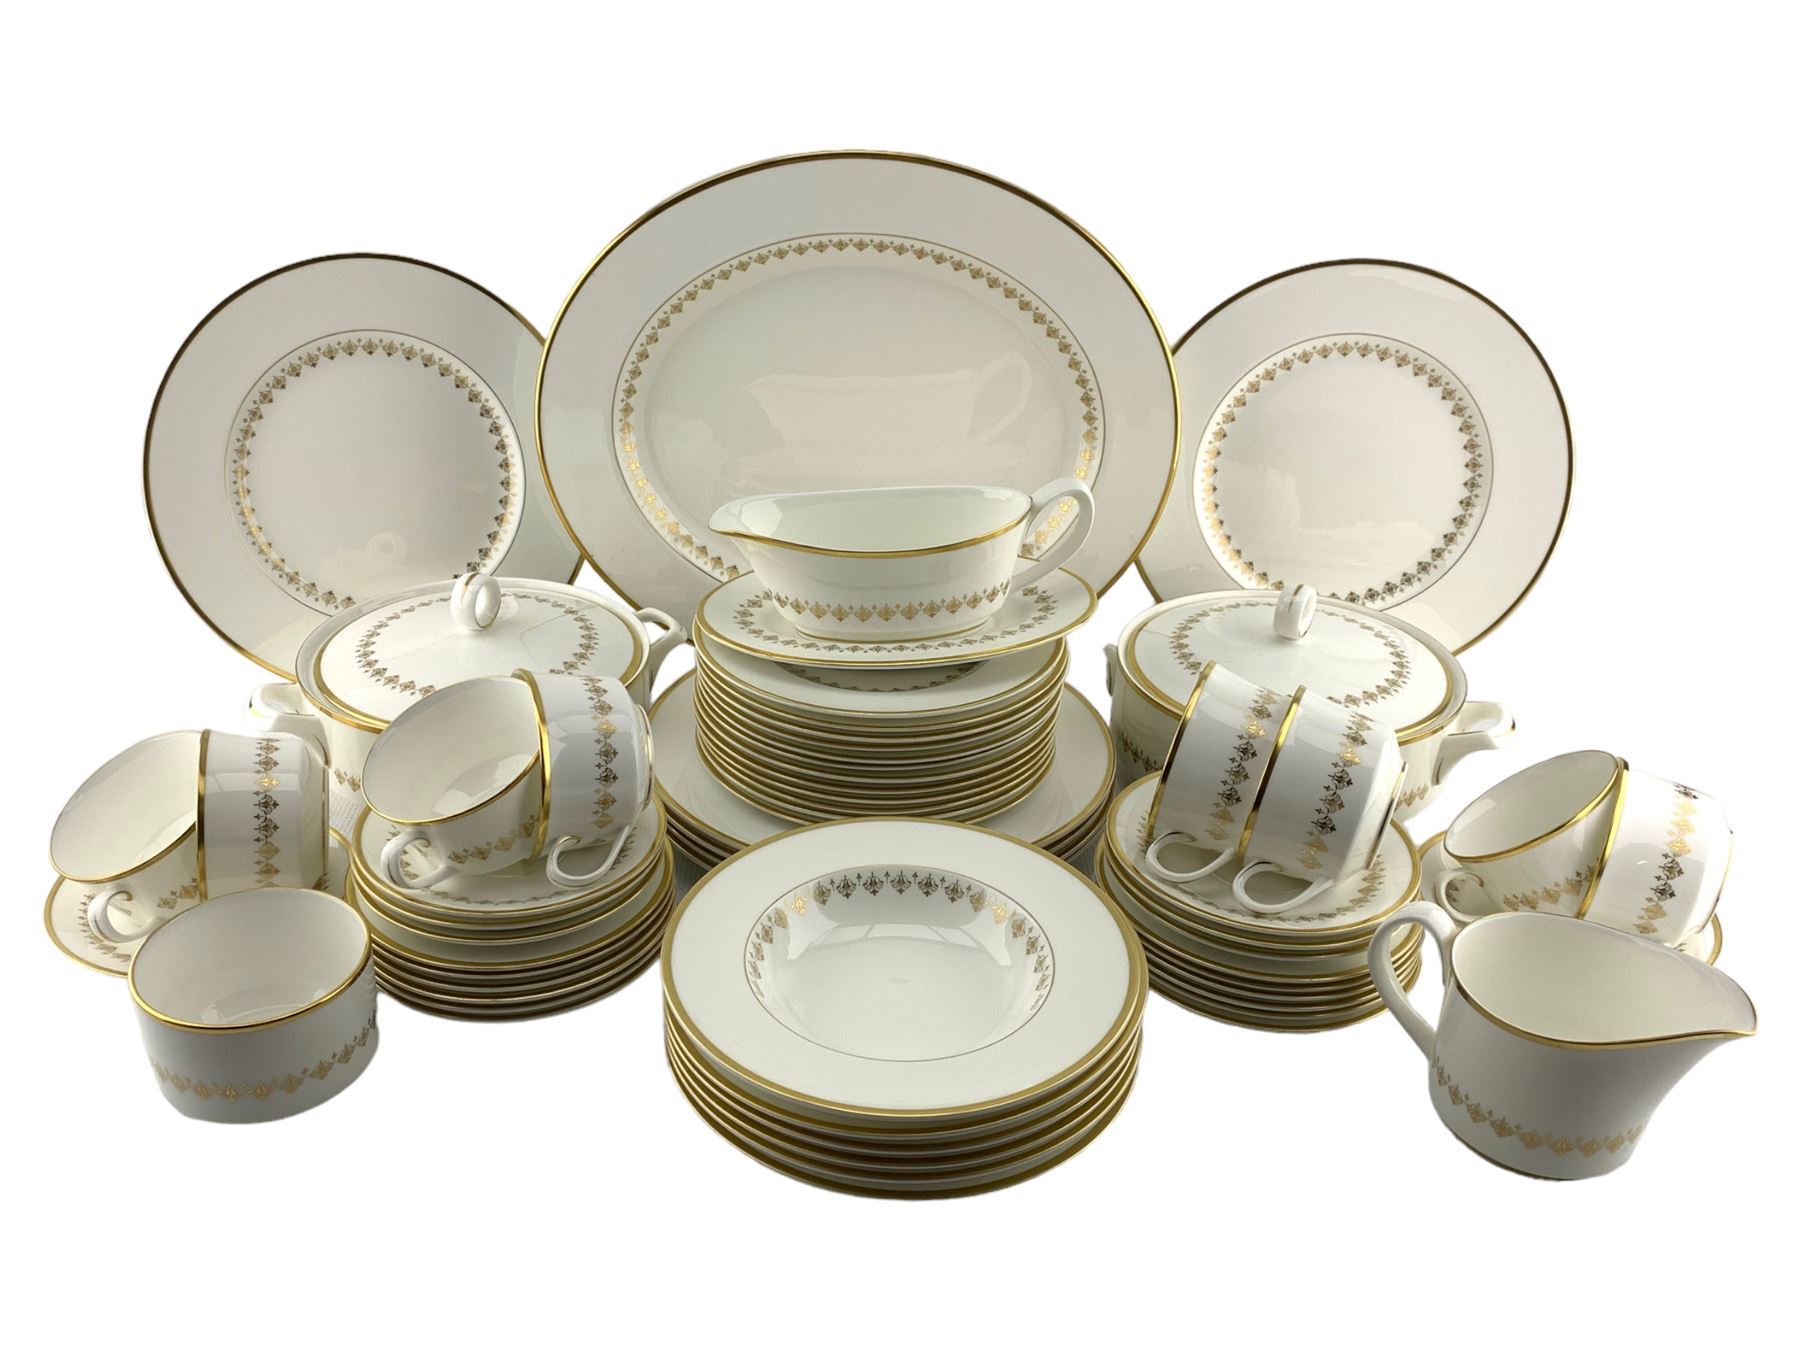 Royal Worcester 'Summer Morning' pattern dinner and tea ware comprising six dinner plates